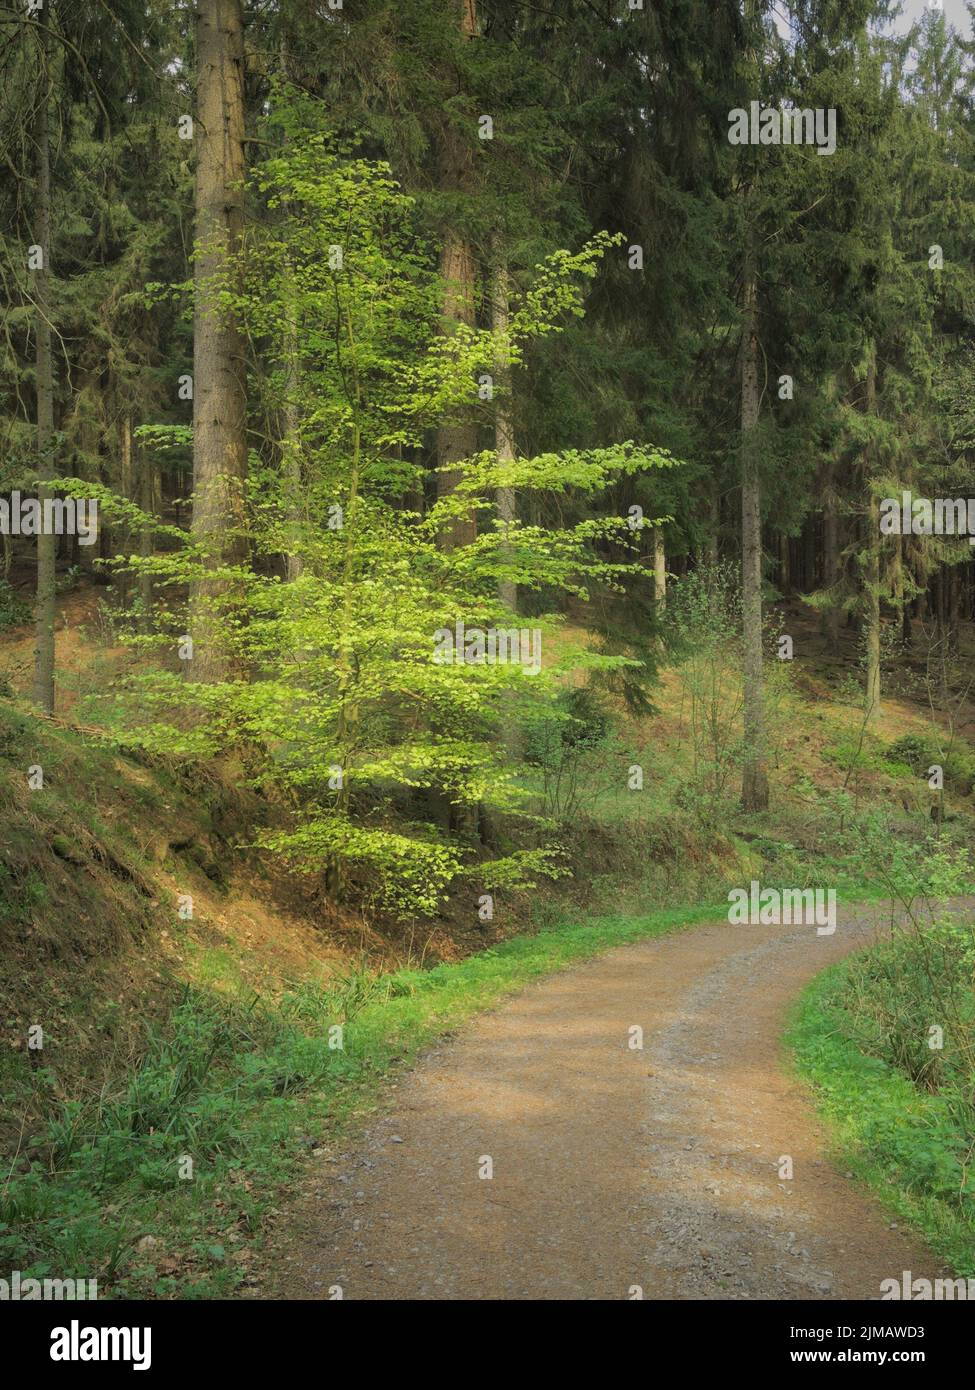 Deister - Range of hills, forest path, Germany Stock Photo